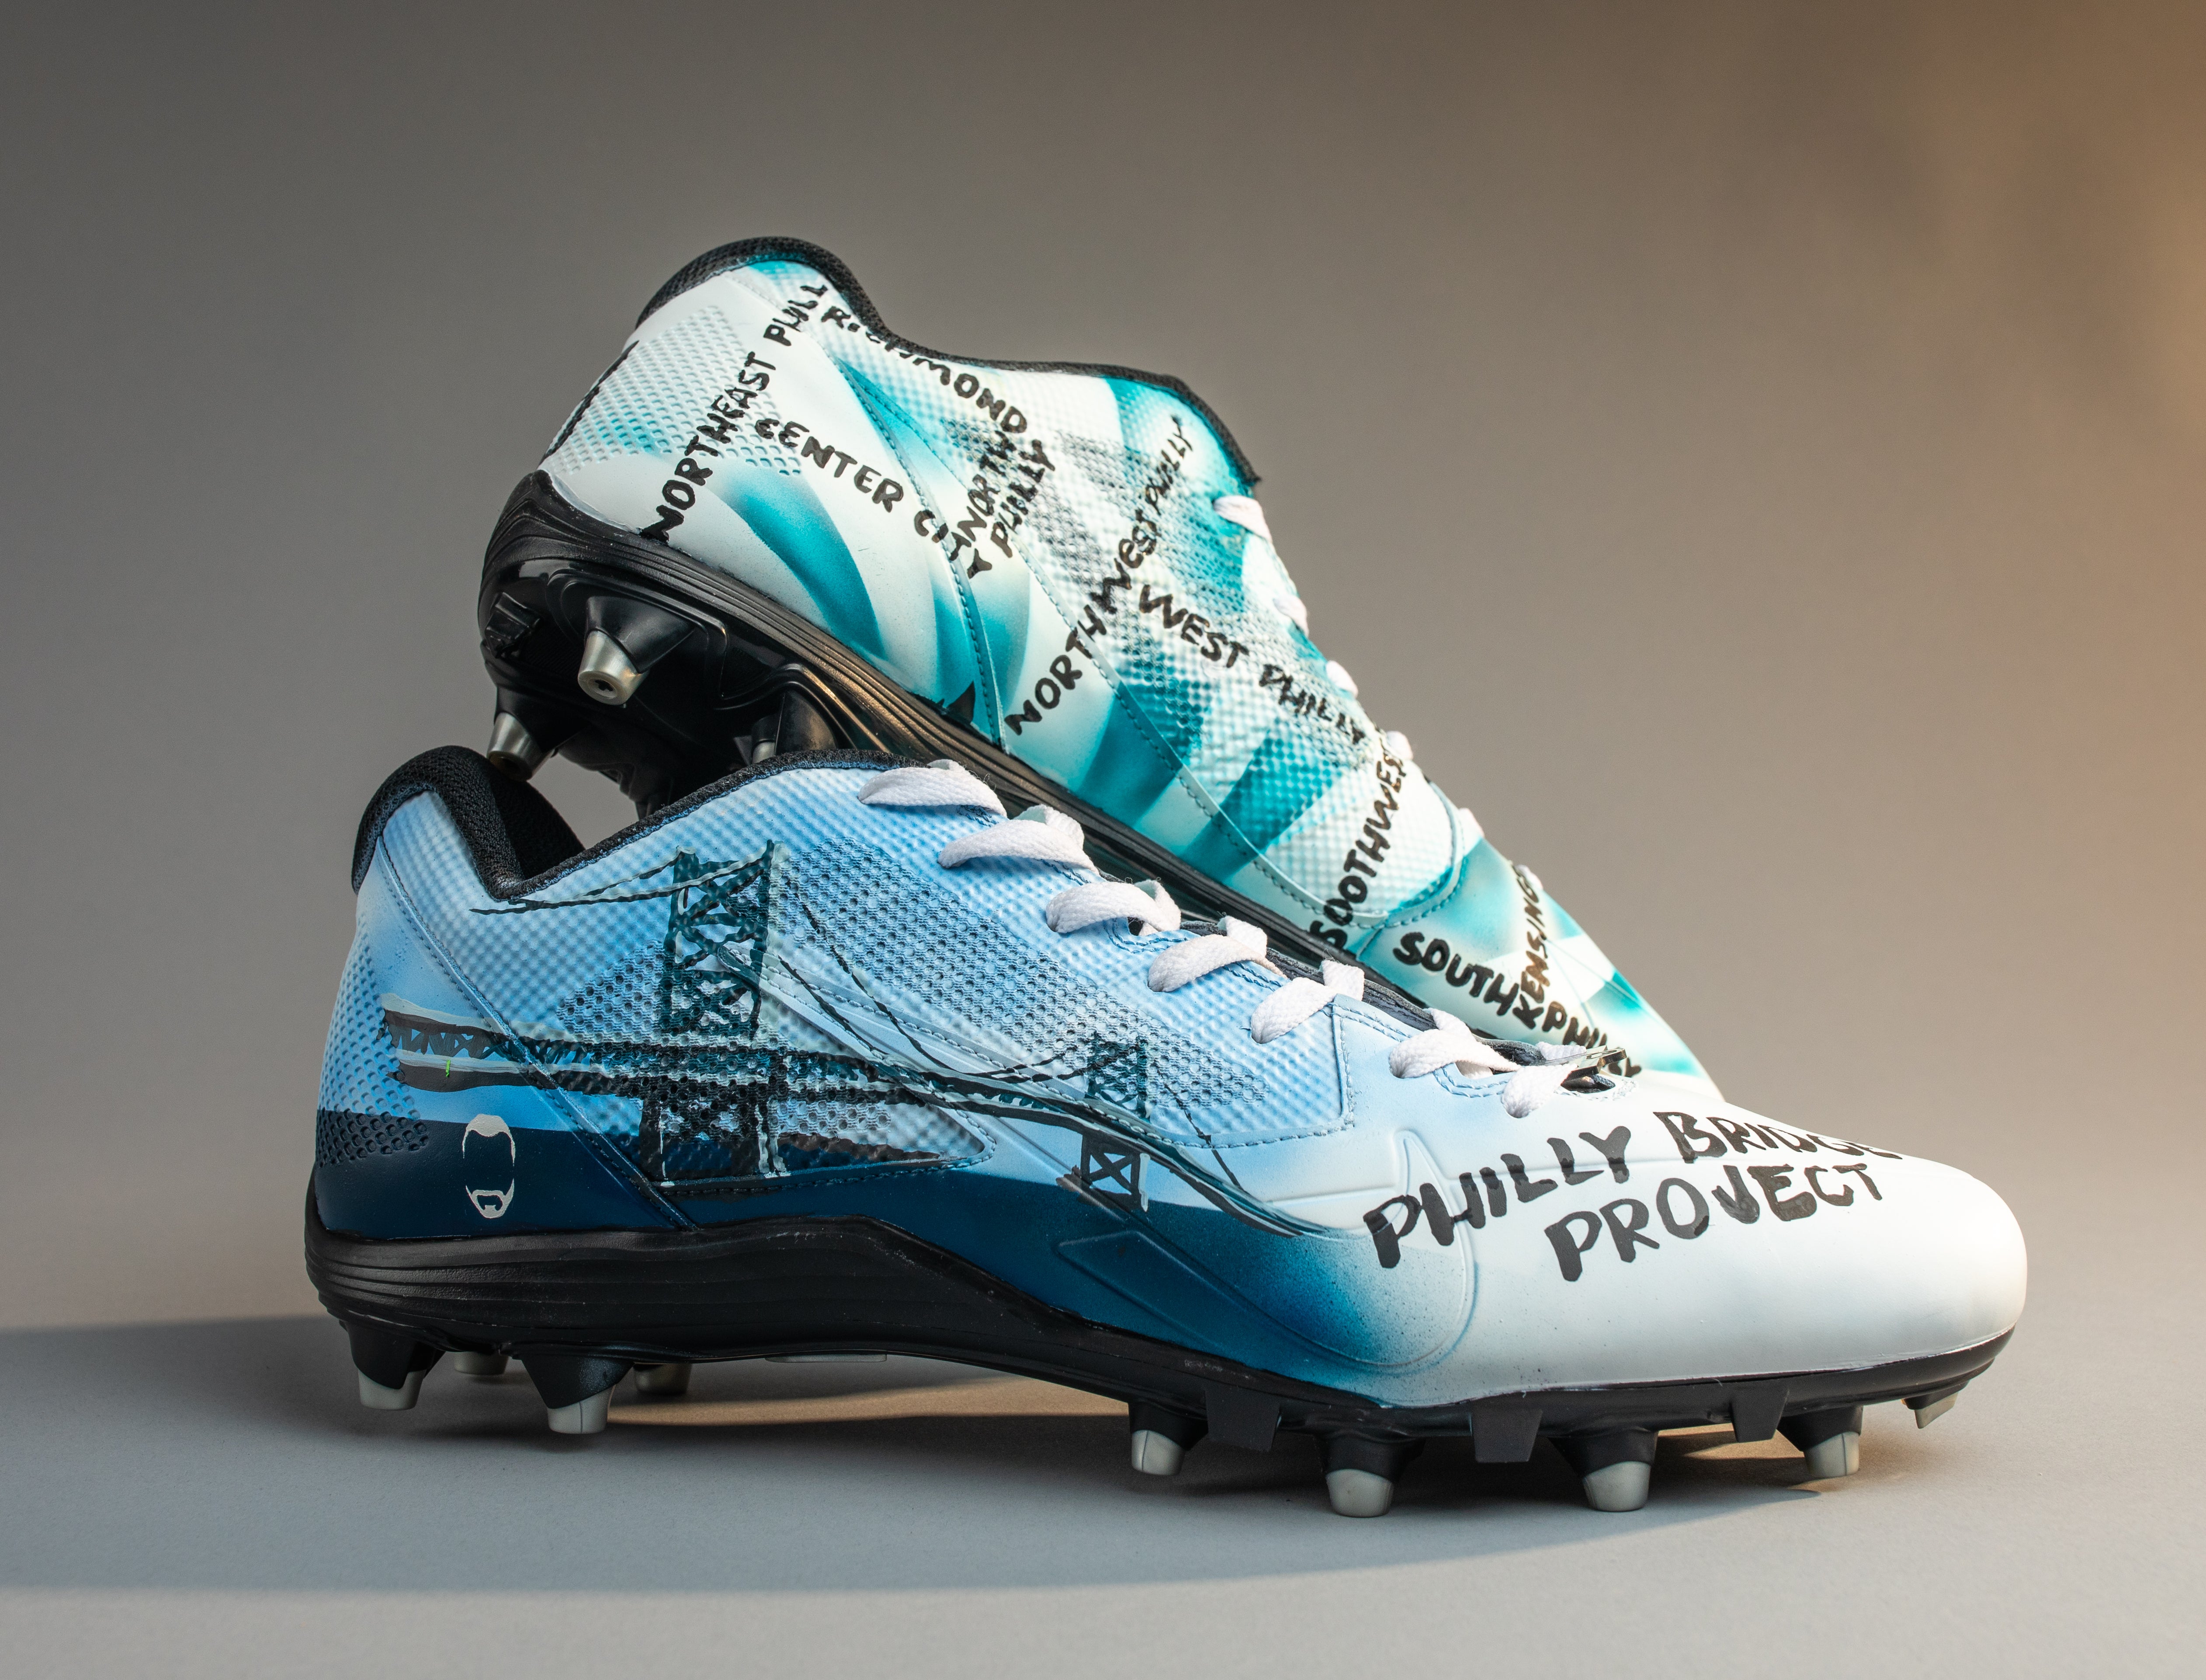 Detailed Look at NFL's My Cause, My Cleats Initiative - Sports